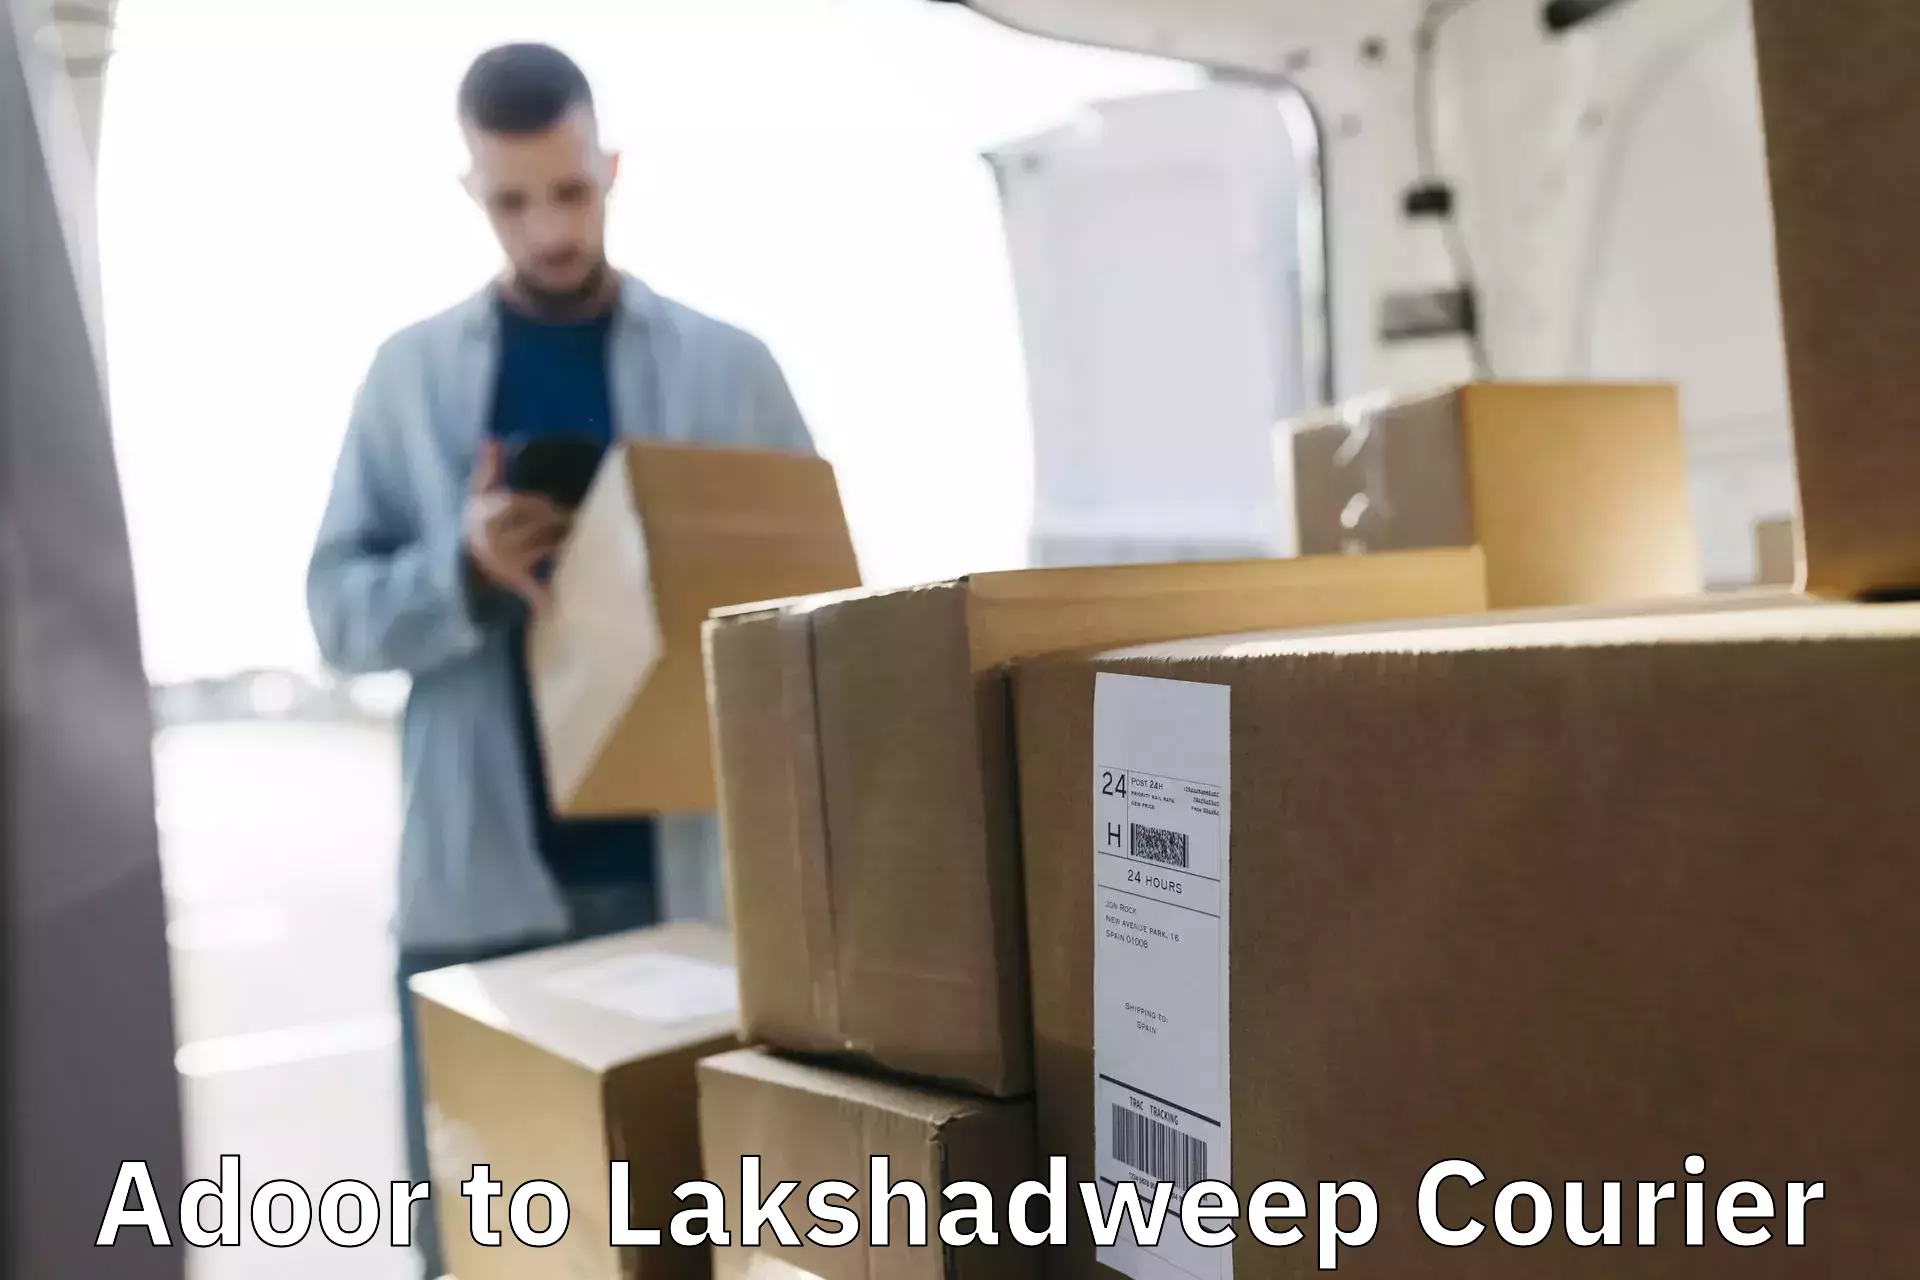 Automated parcel services Adoor to Lakshadweep